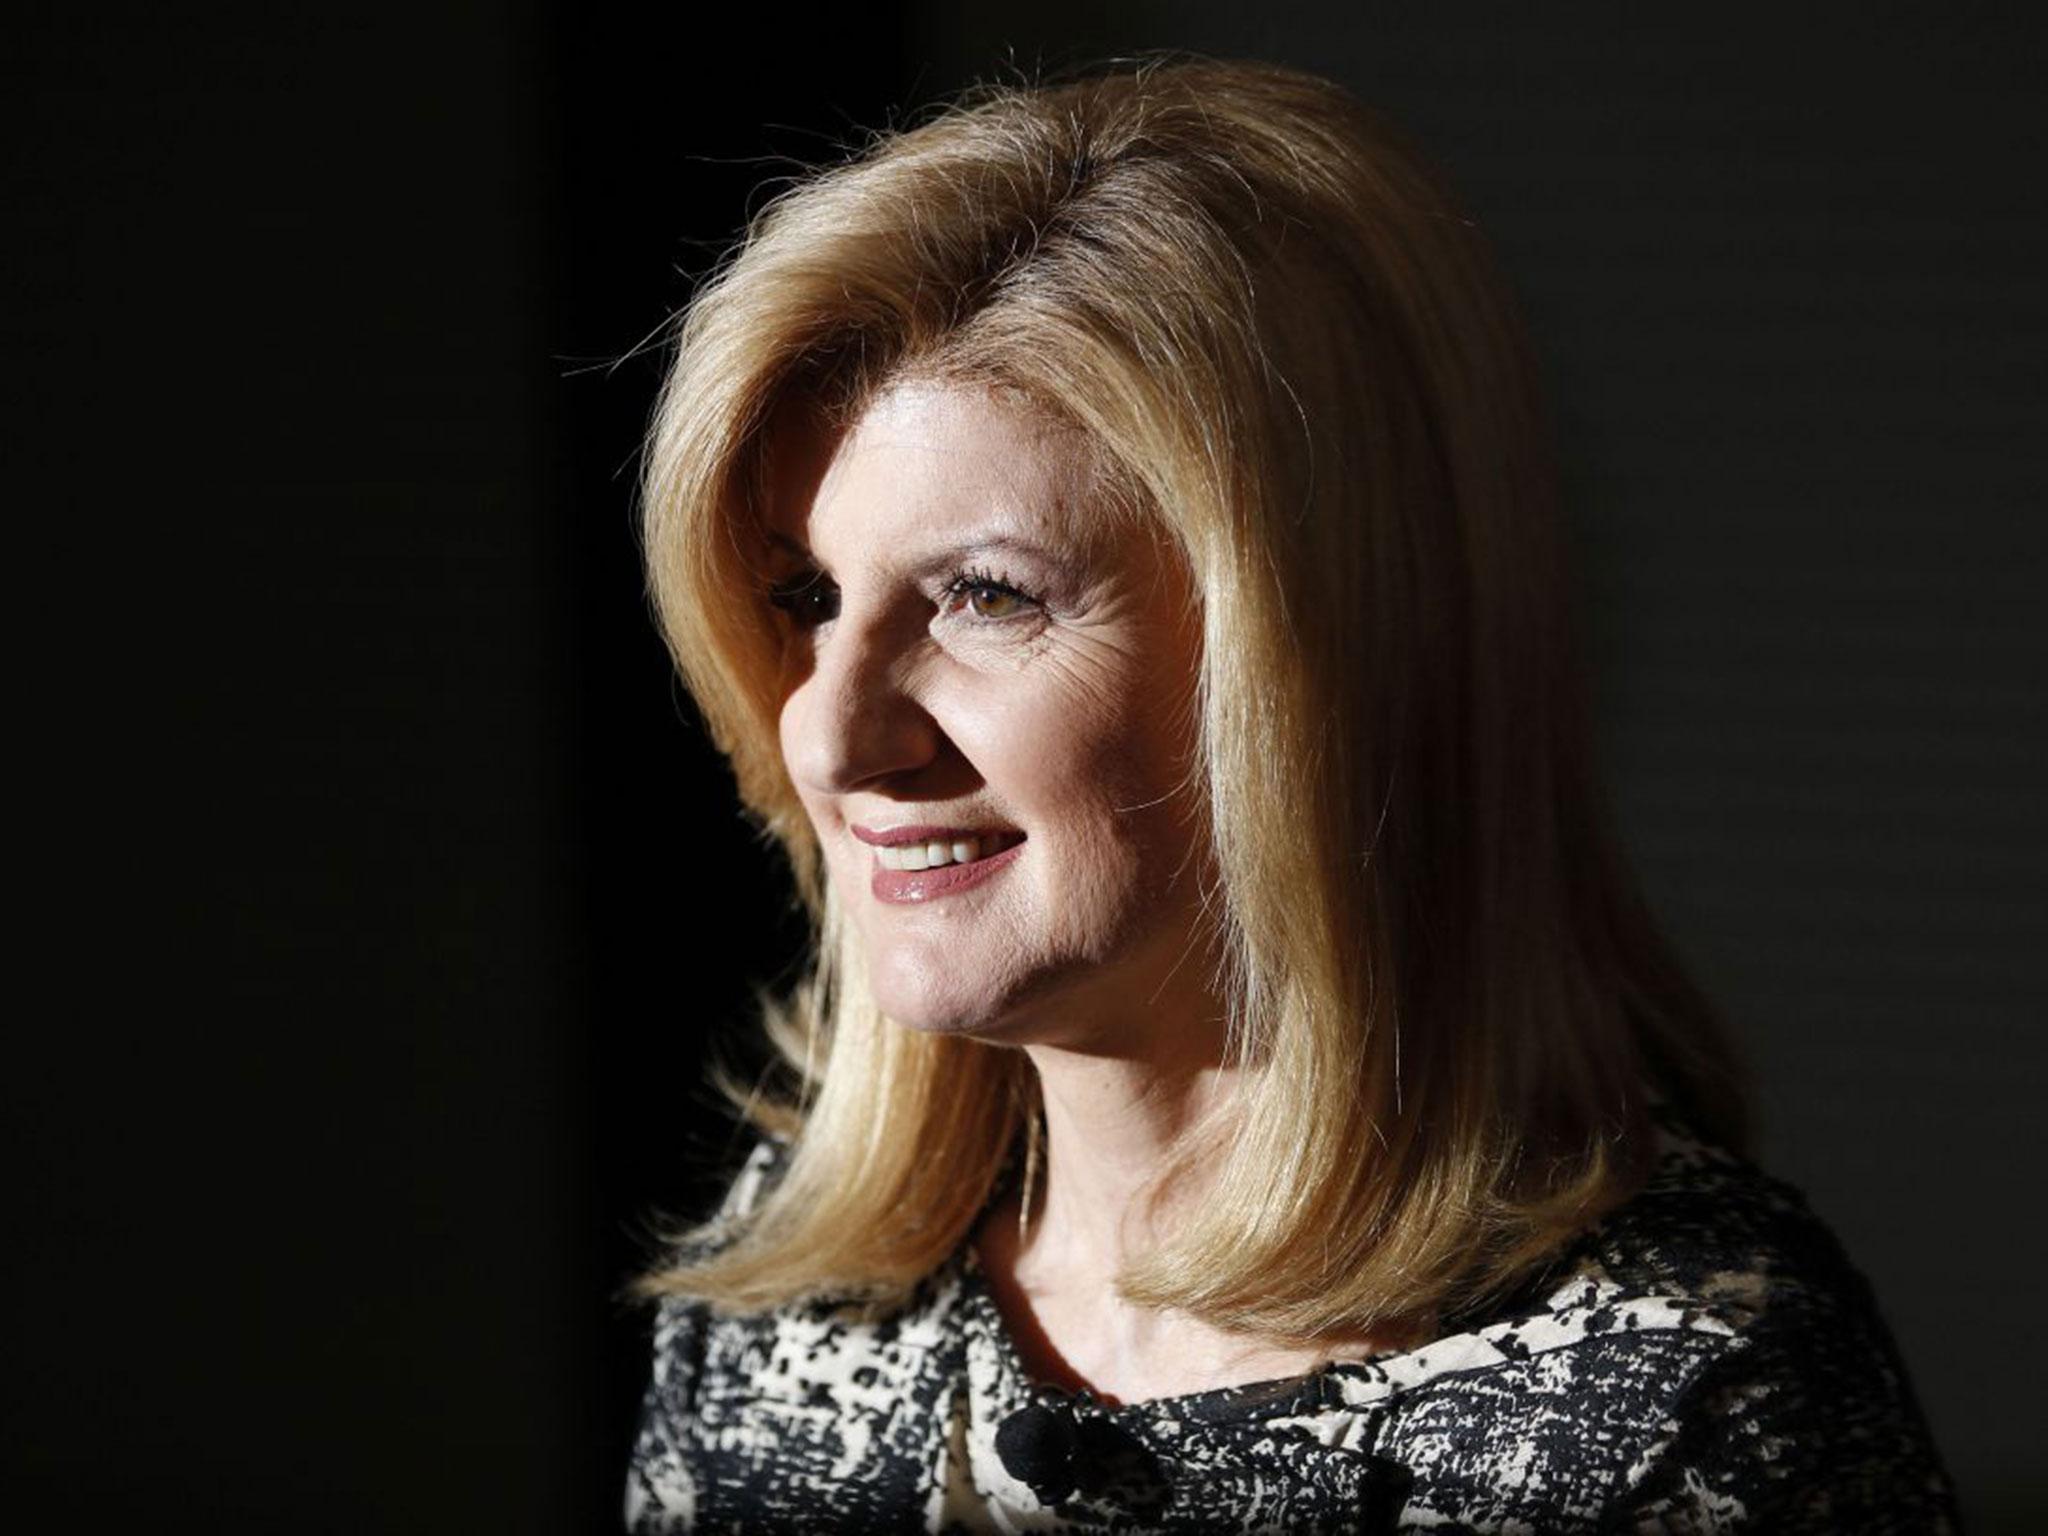 Arianna Huffington has said that the new platform will give a voice to Arab bloggerts across the region